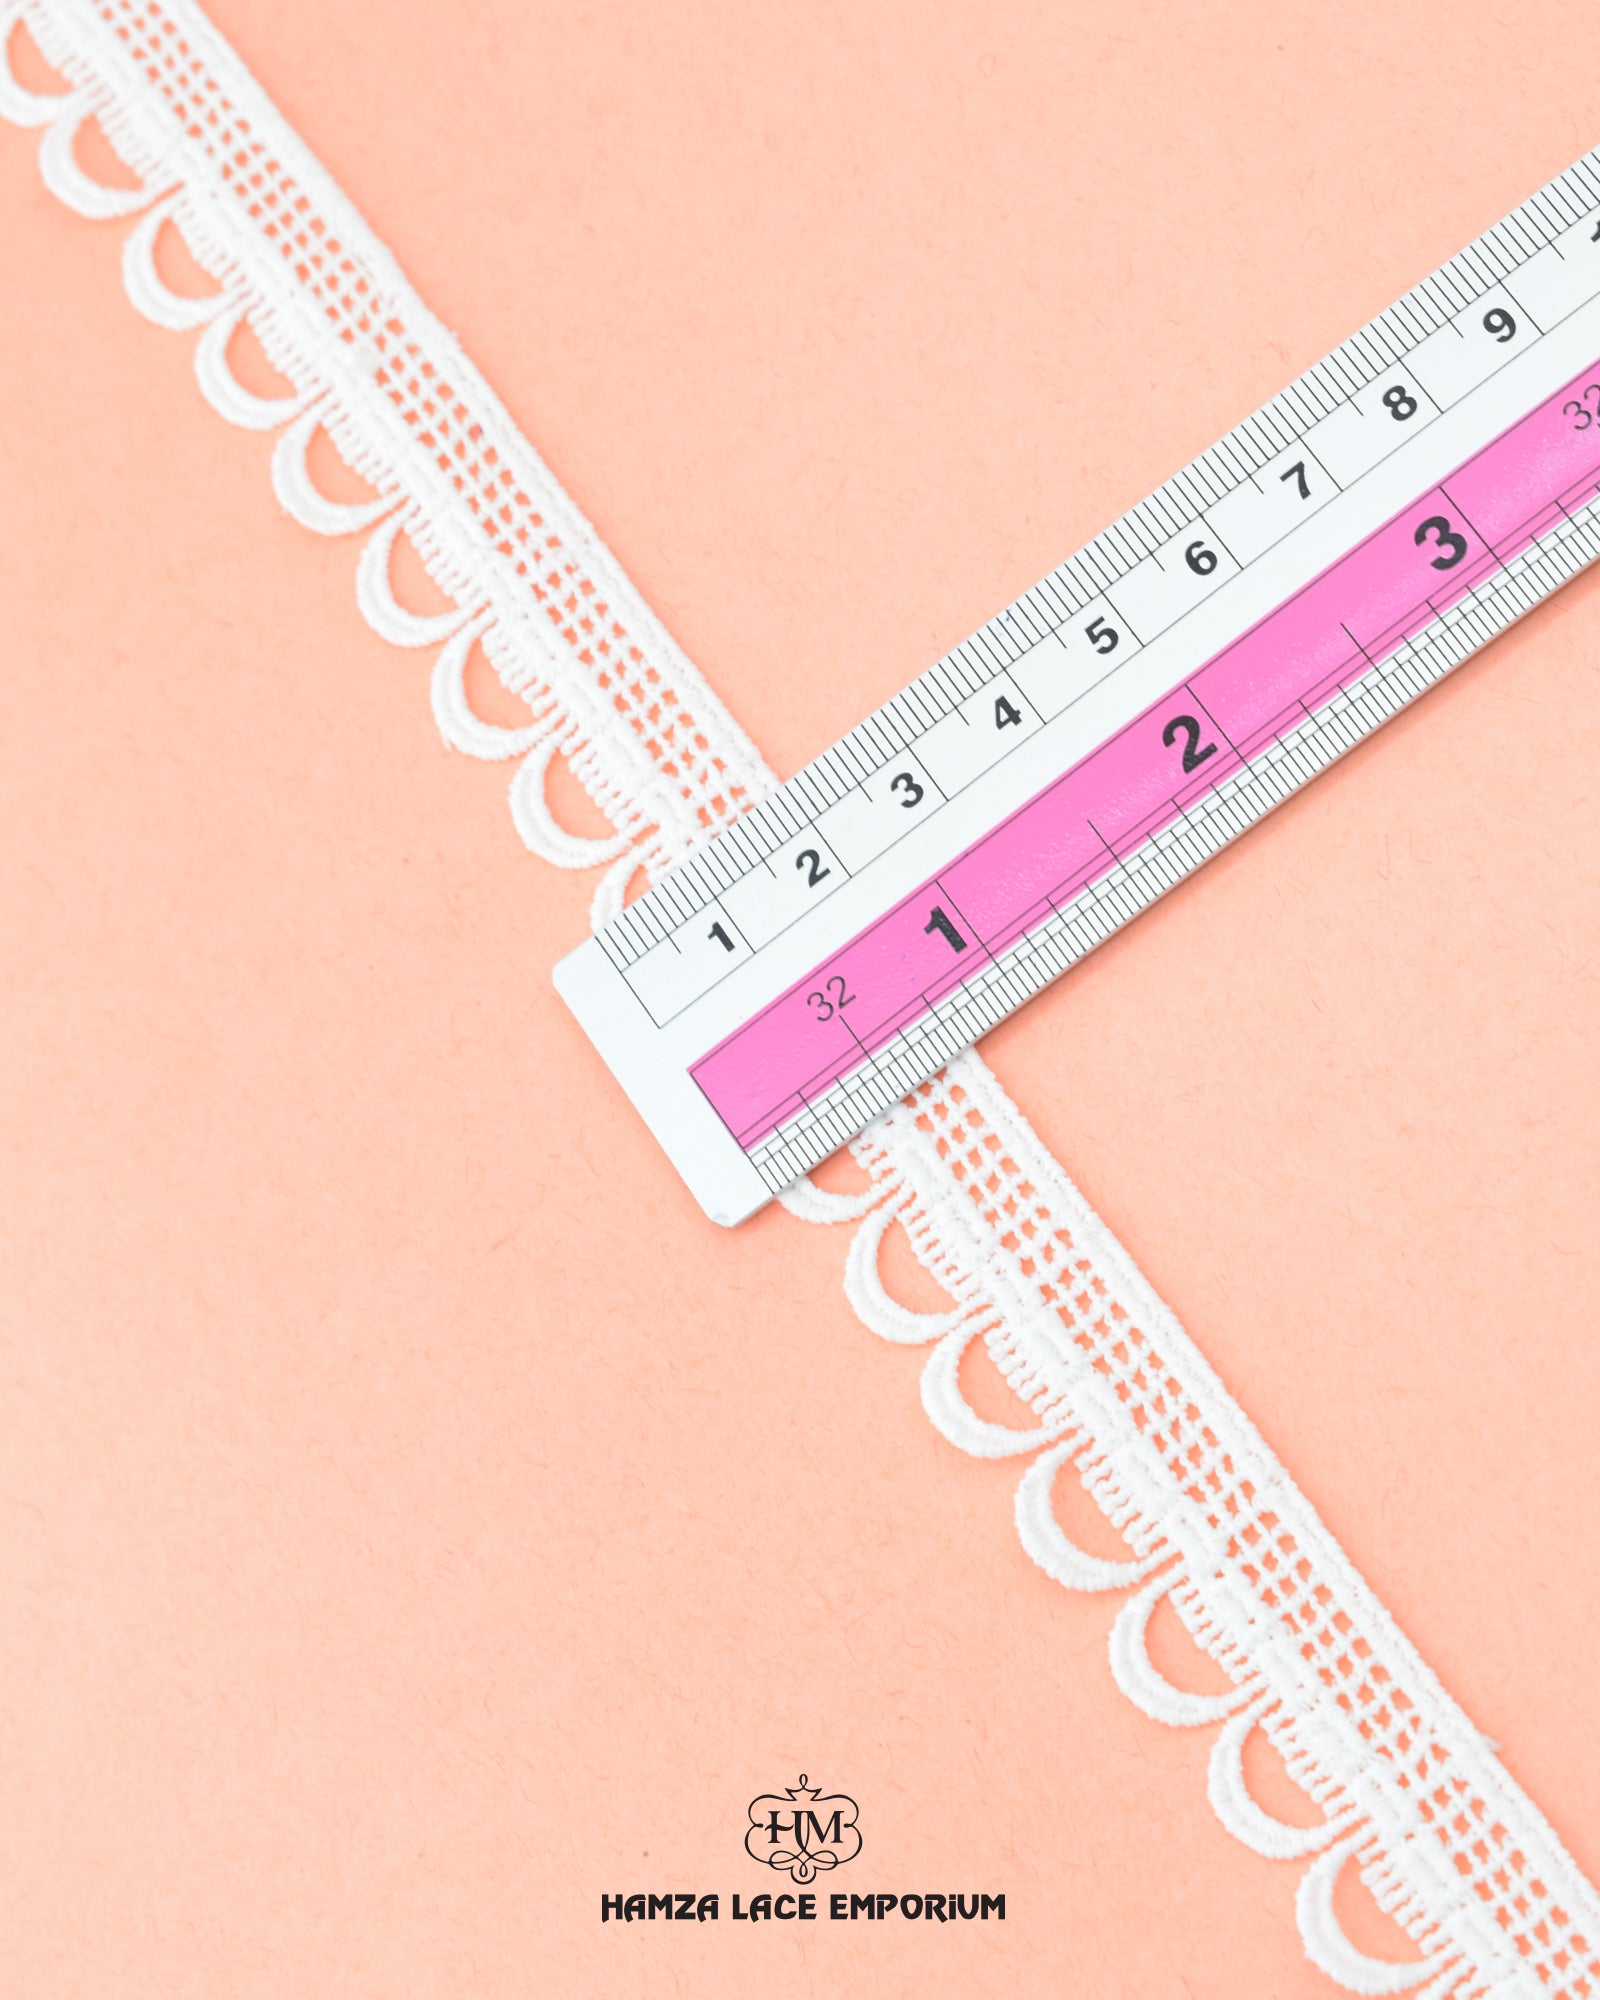 Size of the 'Edging Lace 2819' is shown as '1' inch with the help of a ruler